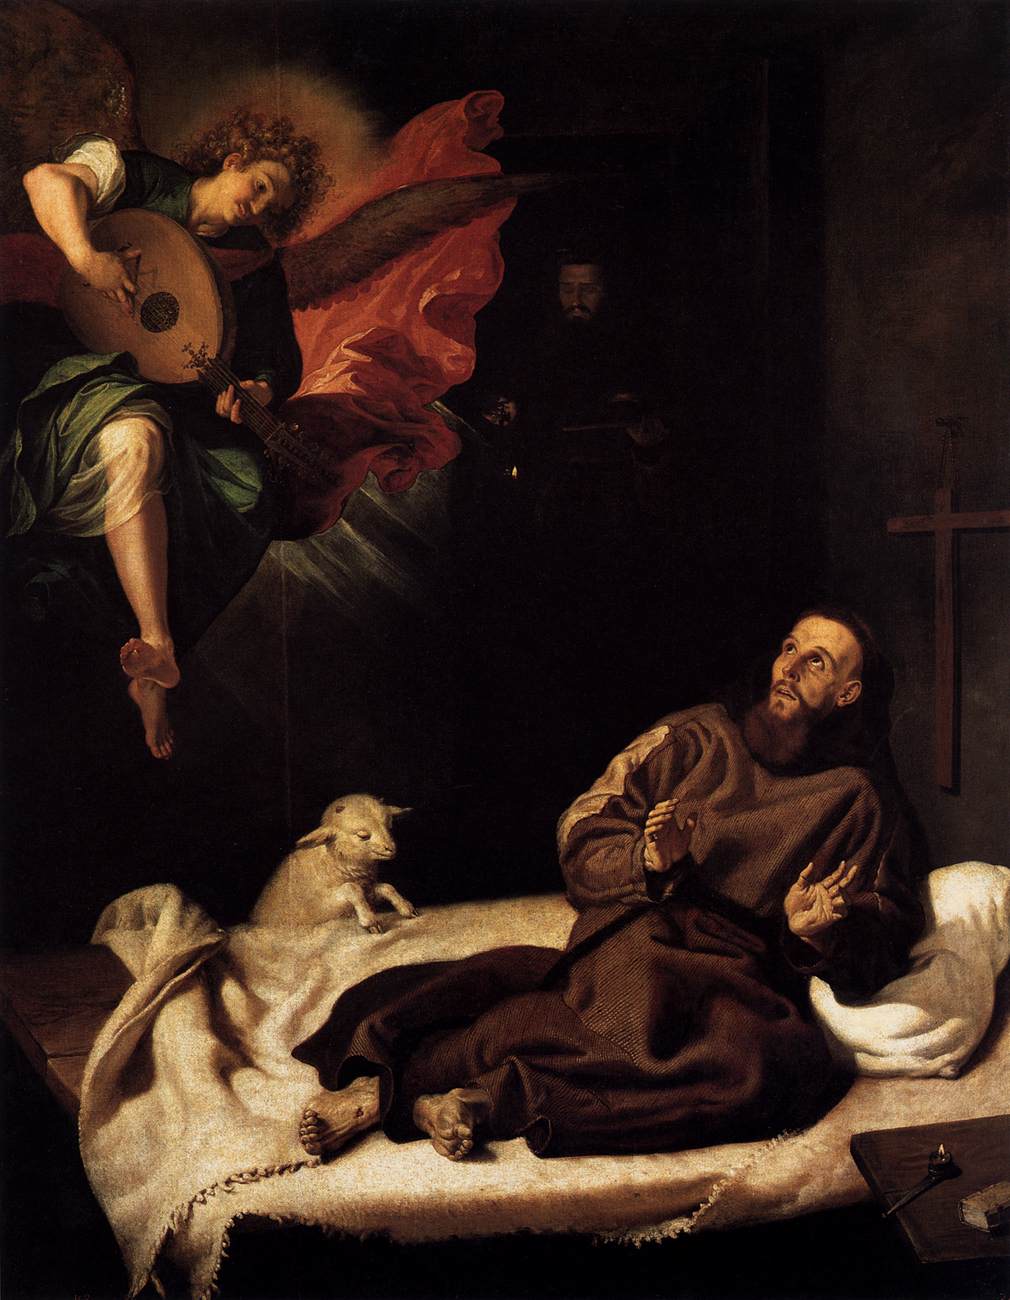 Saint Francis Consoled by Angel